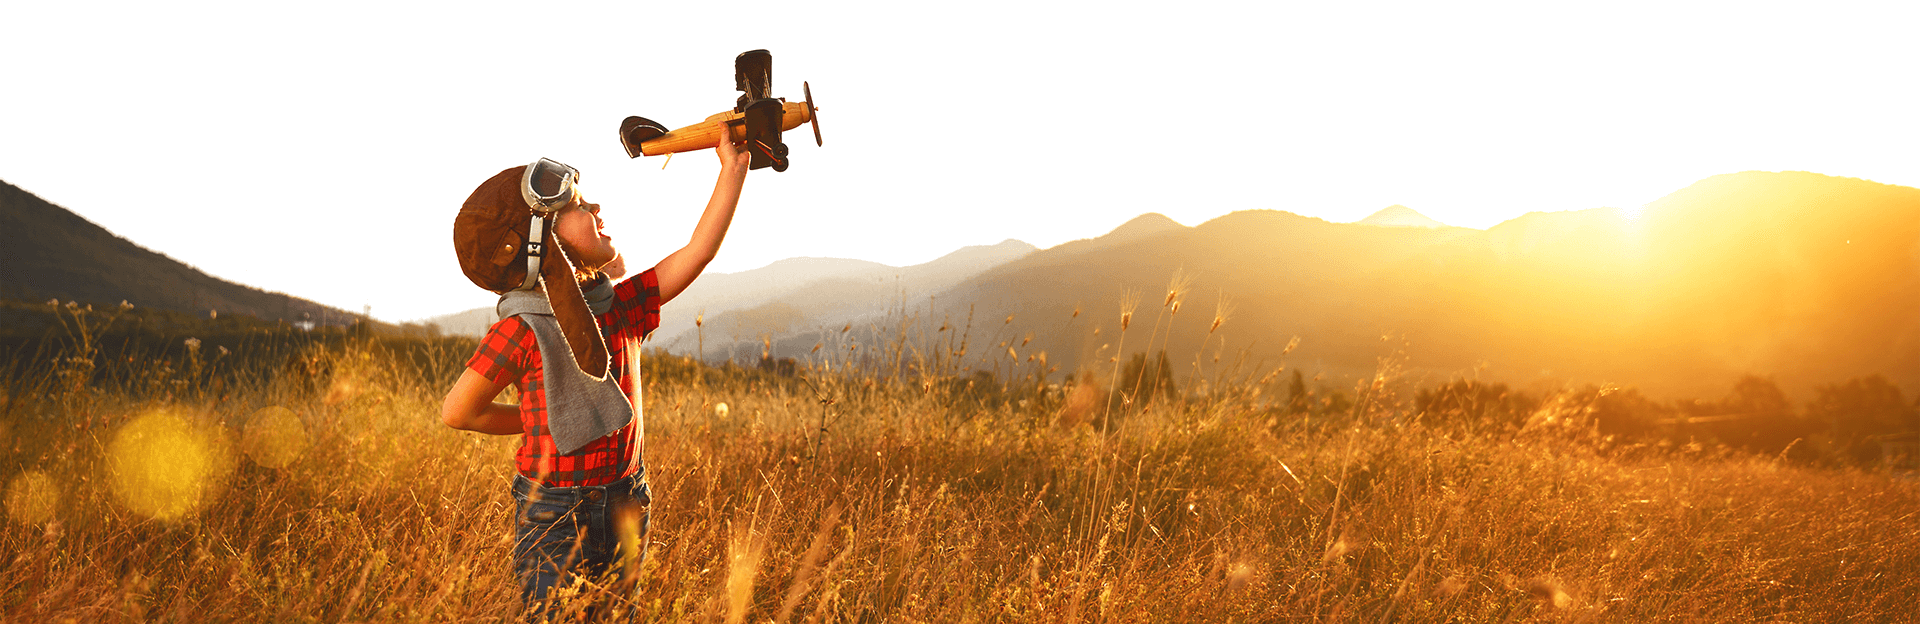 A young boy in an aviator cap and a red shirt holds a model airplane in a field under a bright sunrise